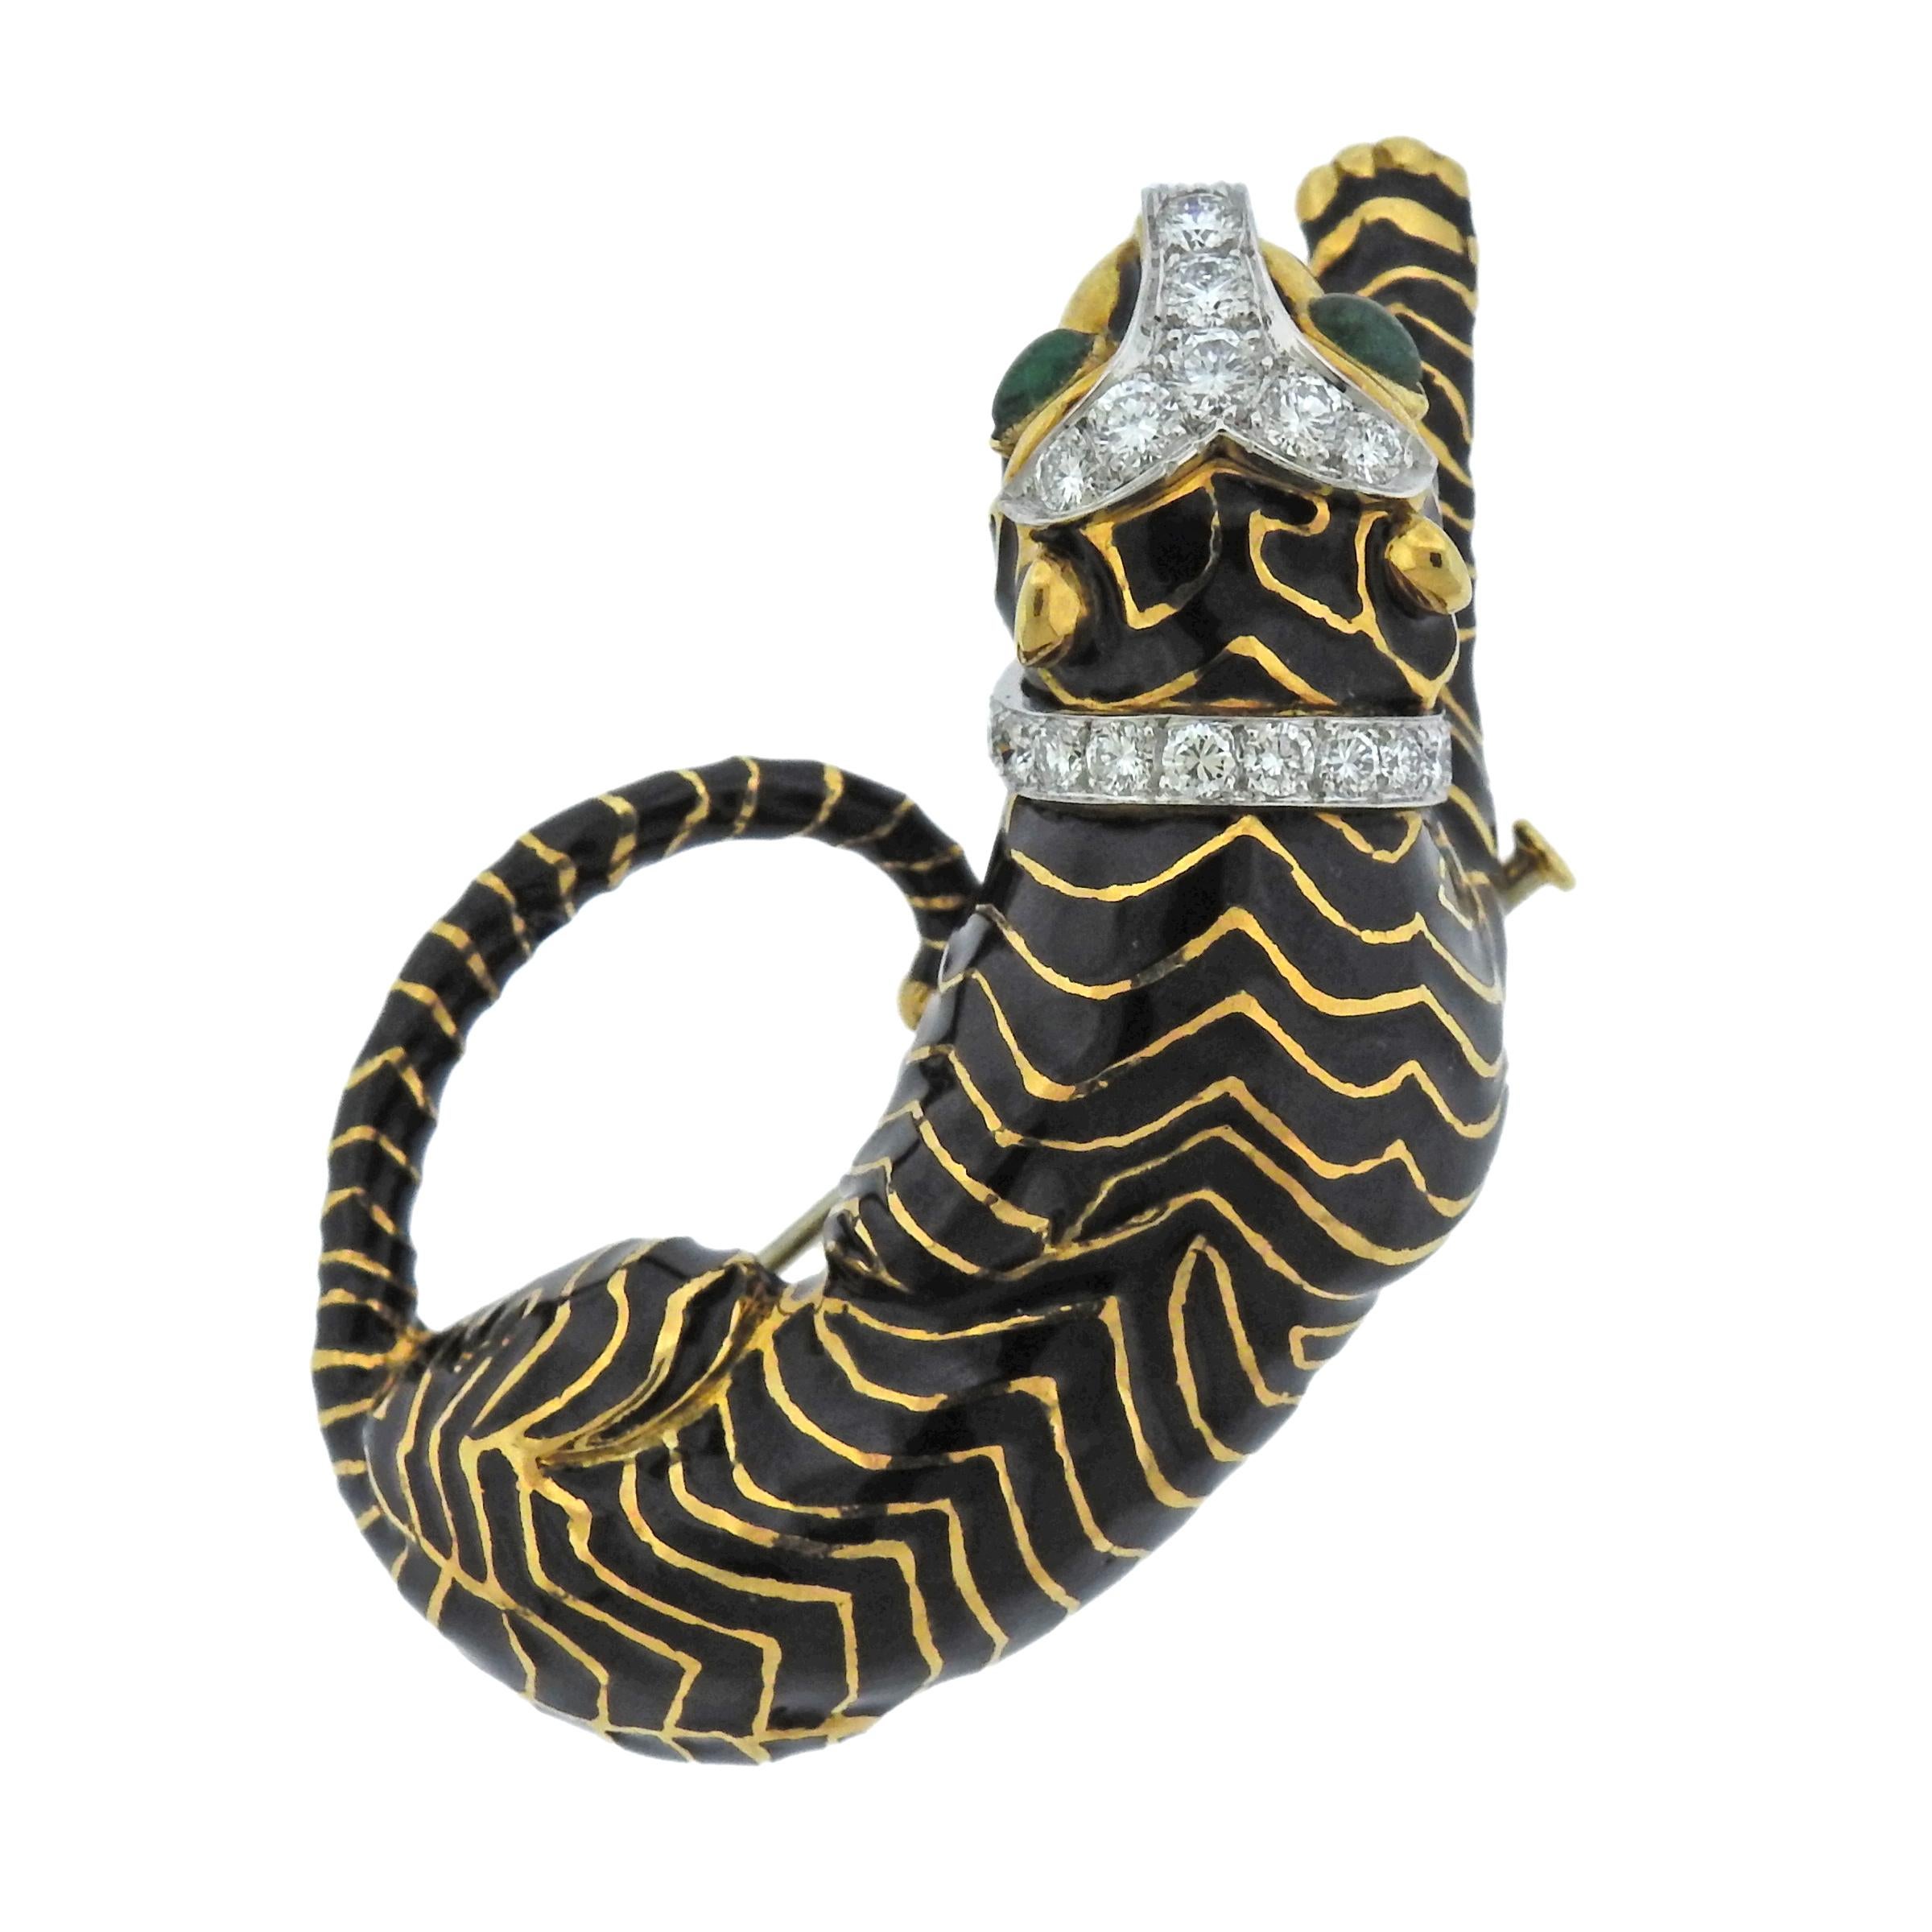 Rare 18k gold and platinum tiger brooch, crafted by David Webb, decorated with black enamel, adorned with approx. 1.20ctw in H/VS diamonds and emerald eyes. Brooch measures 55mm X 38mm, Marked 18k Webb Plat, weighs 48.4 grams.